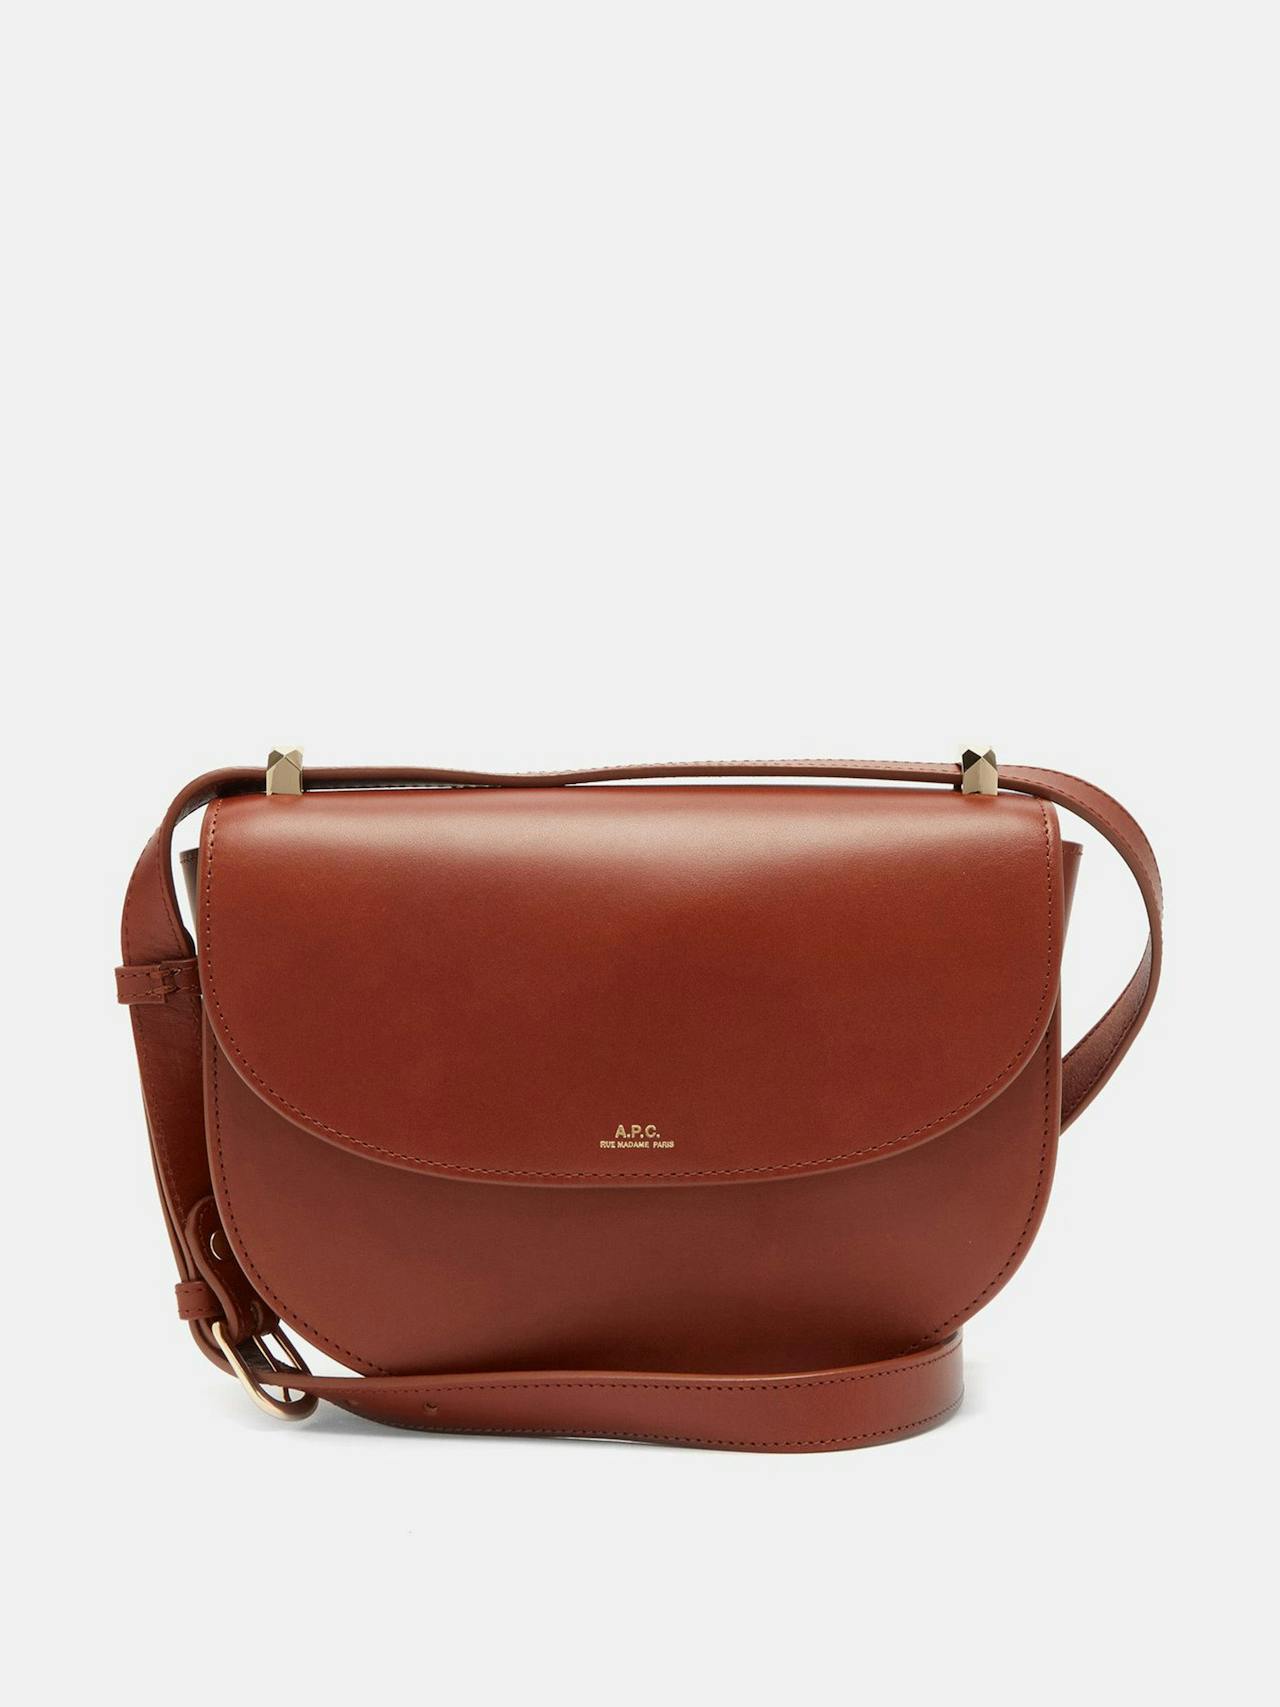 Genève cross-body smooth-leather bag in Tan